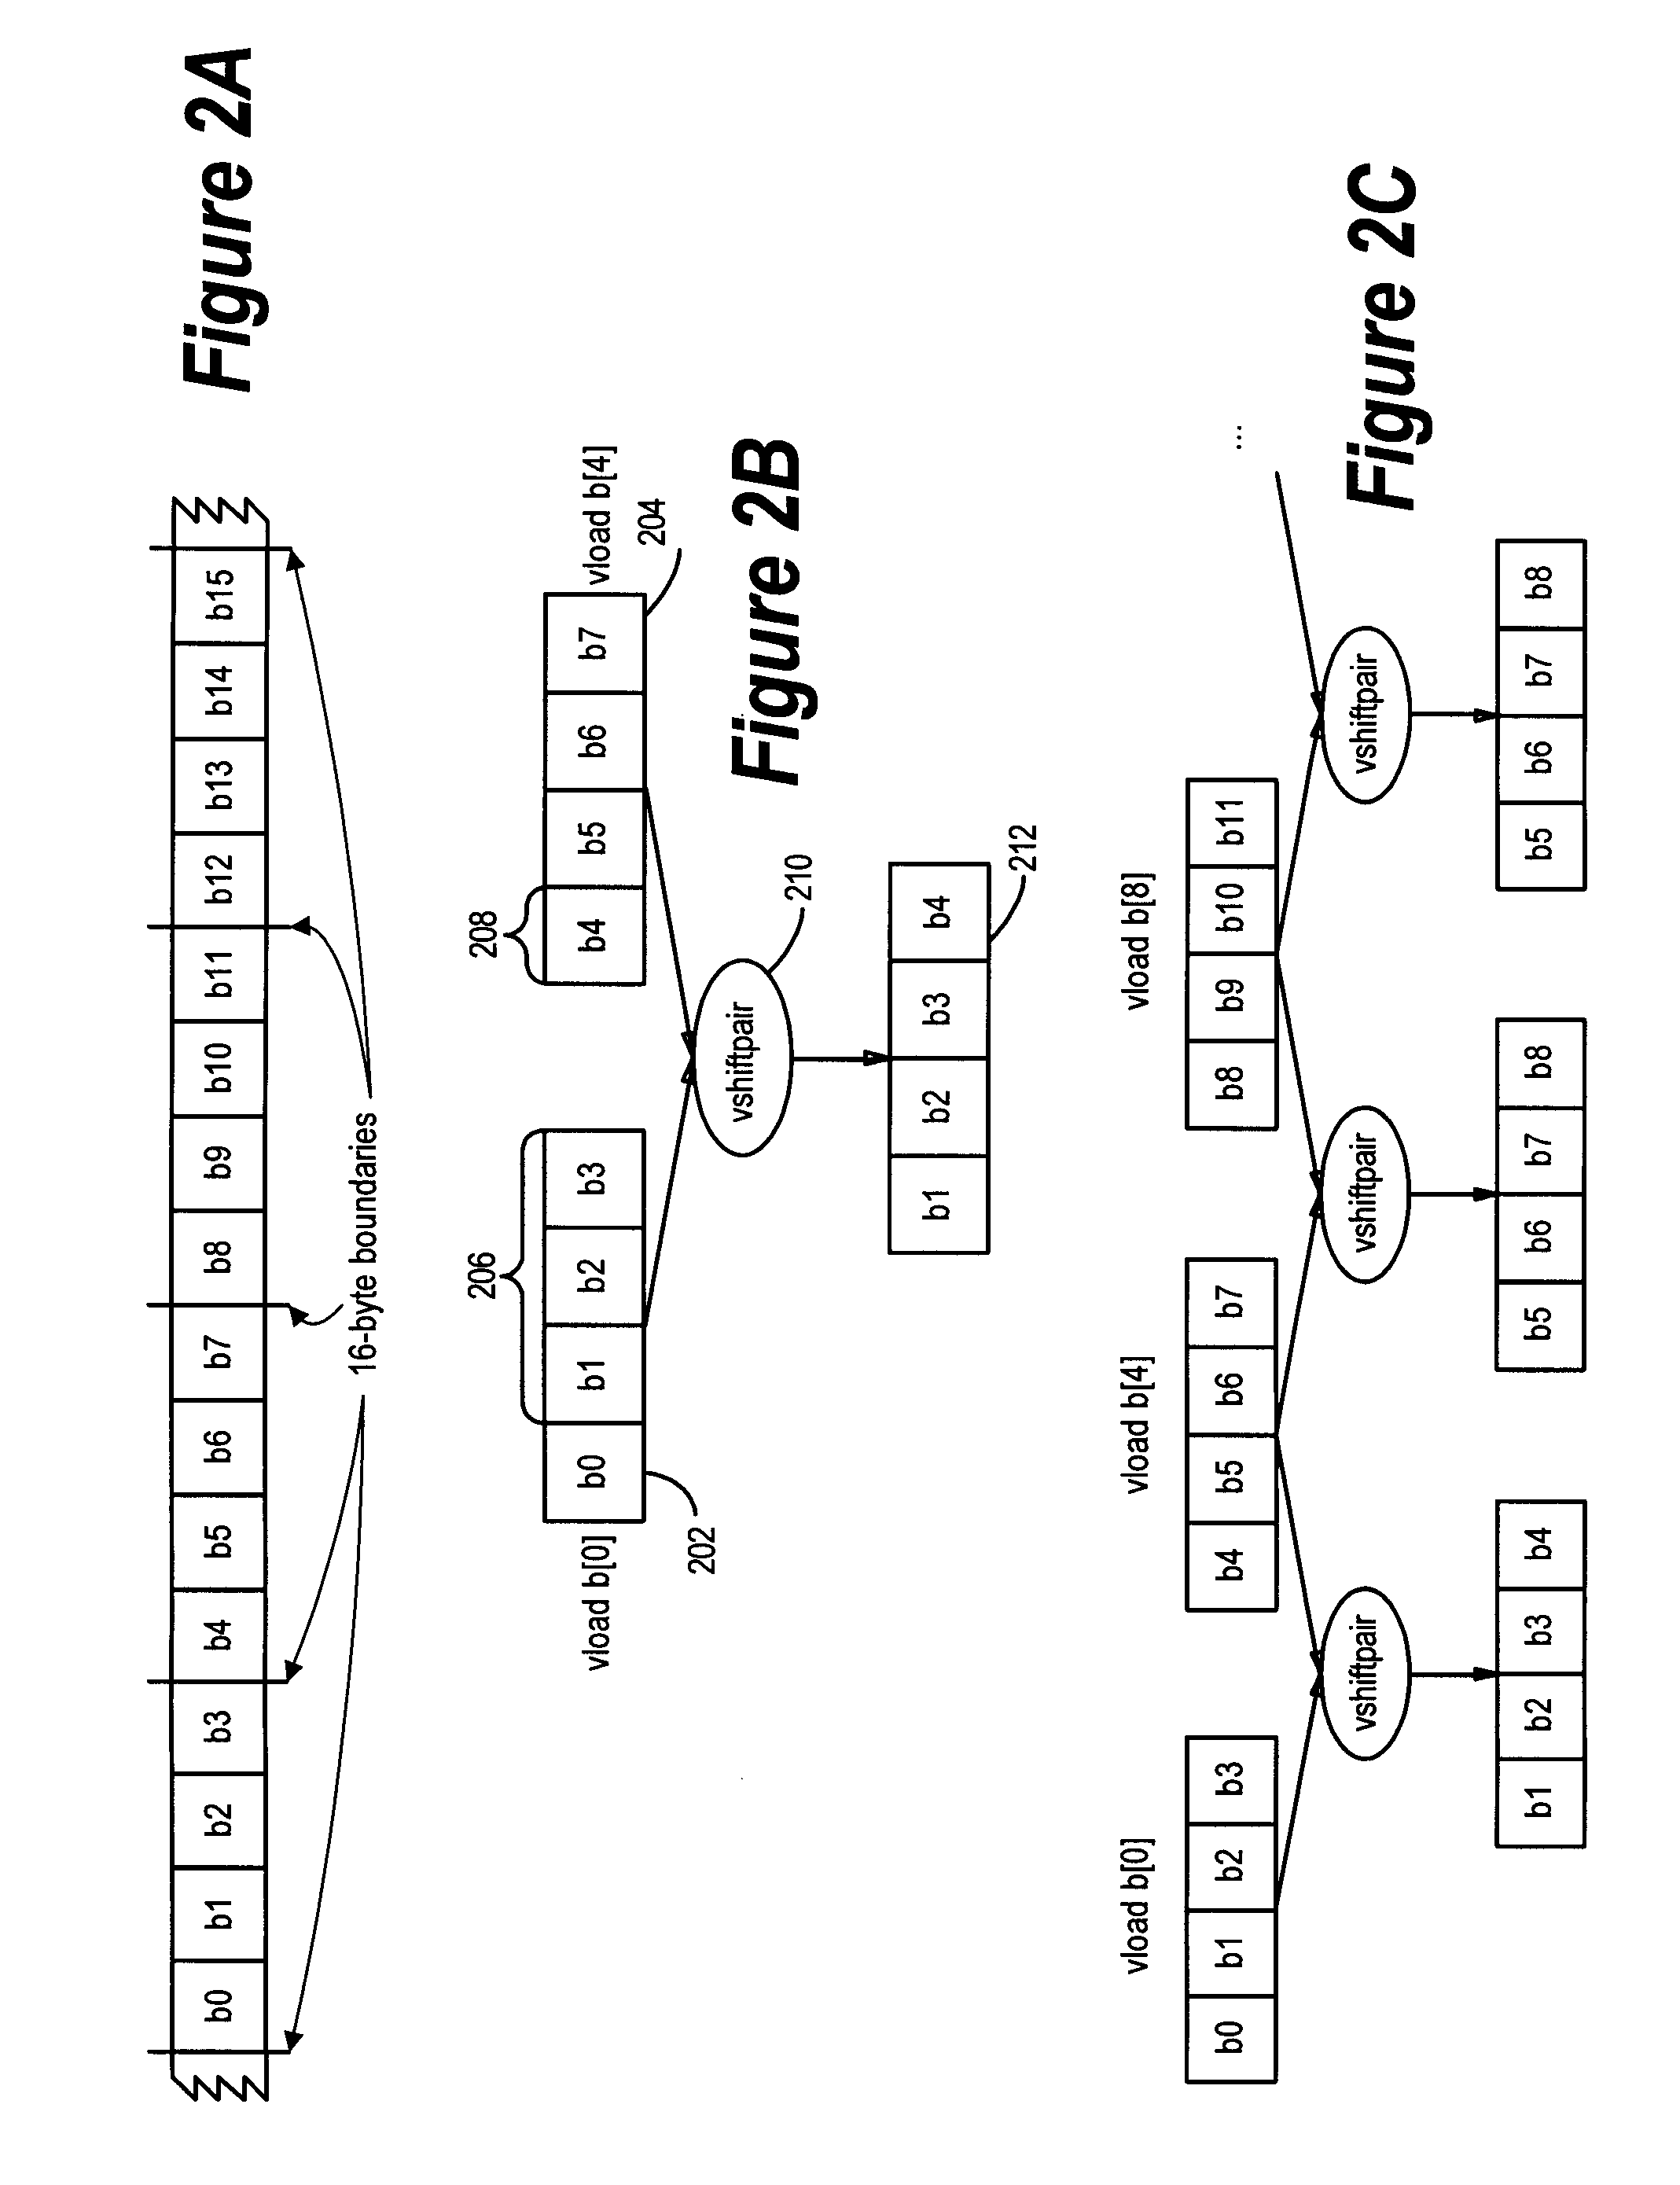 Framework for efficient code generation using loop peeling for SIMD loop code with multiple misaligned statements